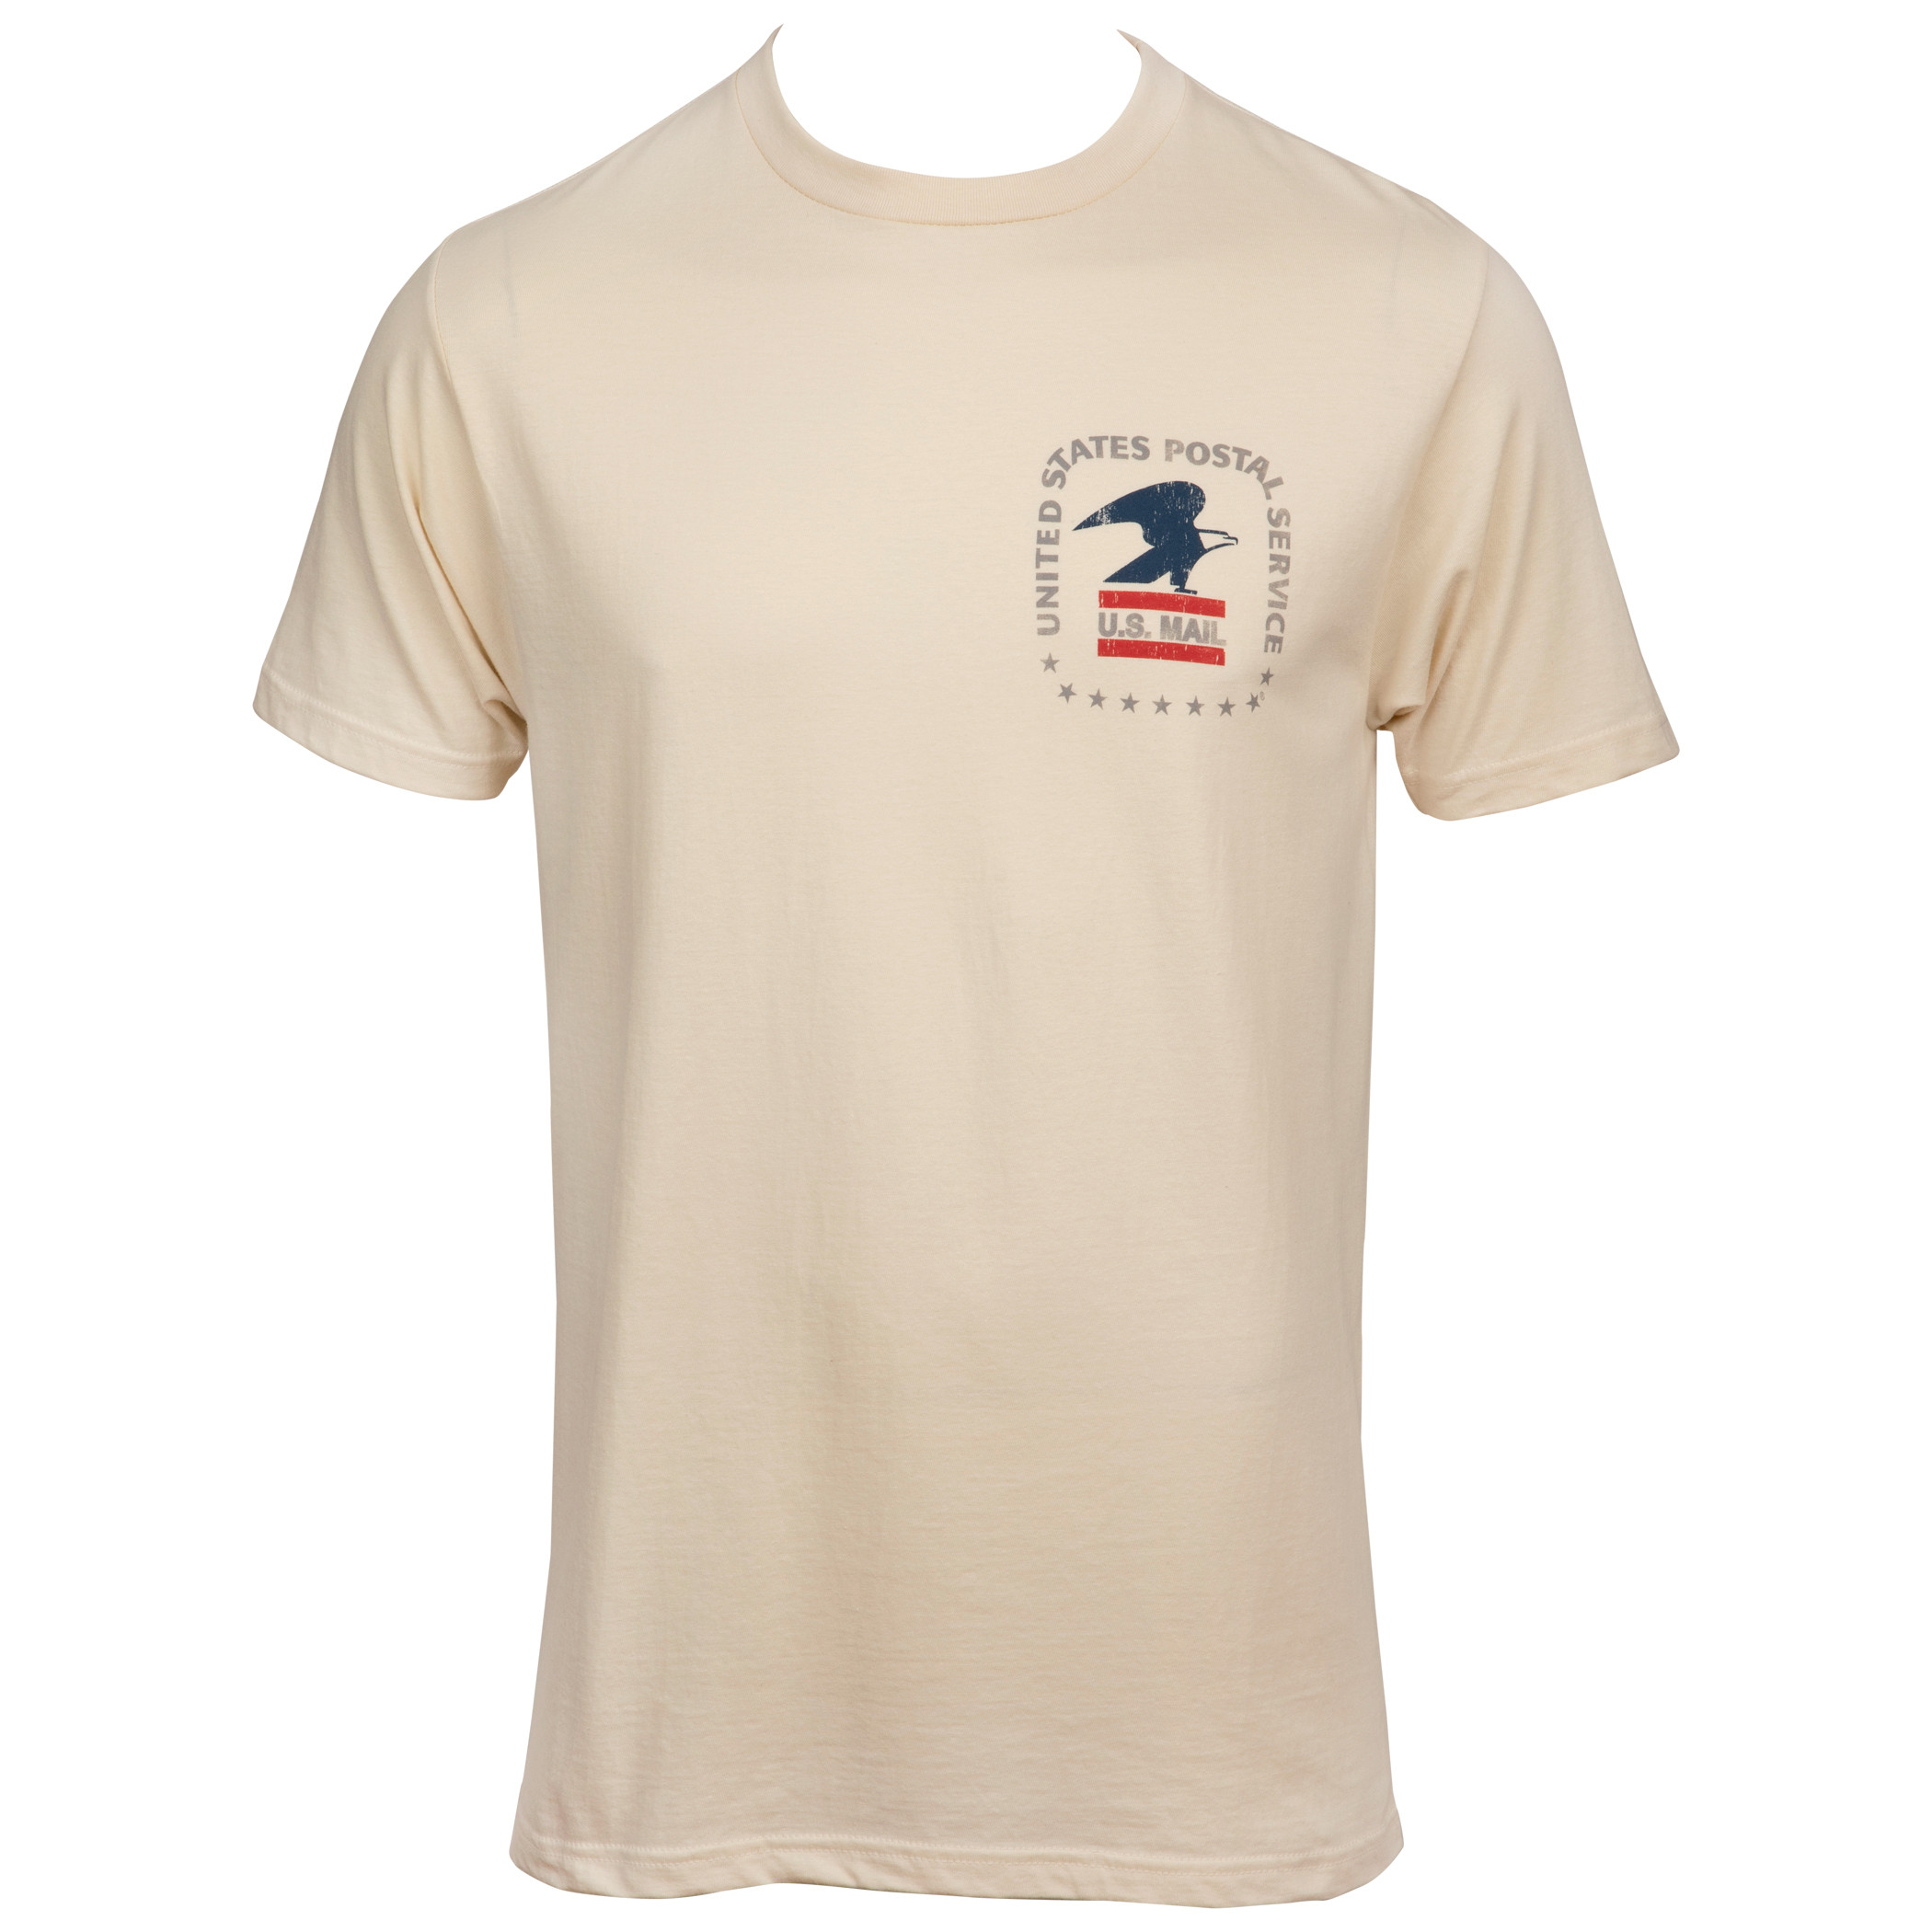 The United States Postal Service Front and Back Print T-Shirt